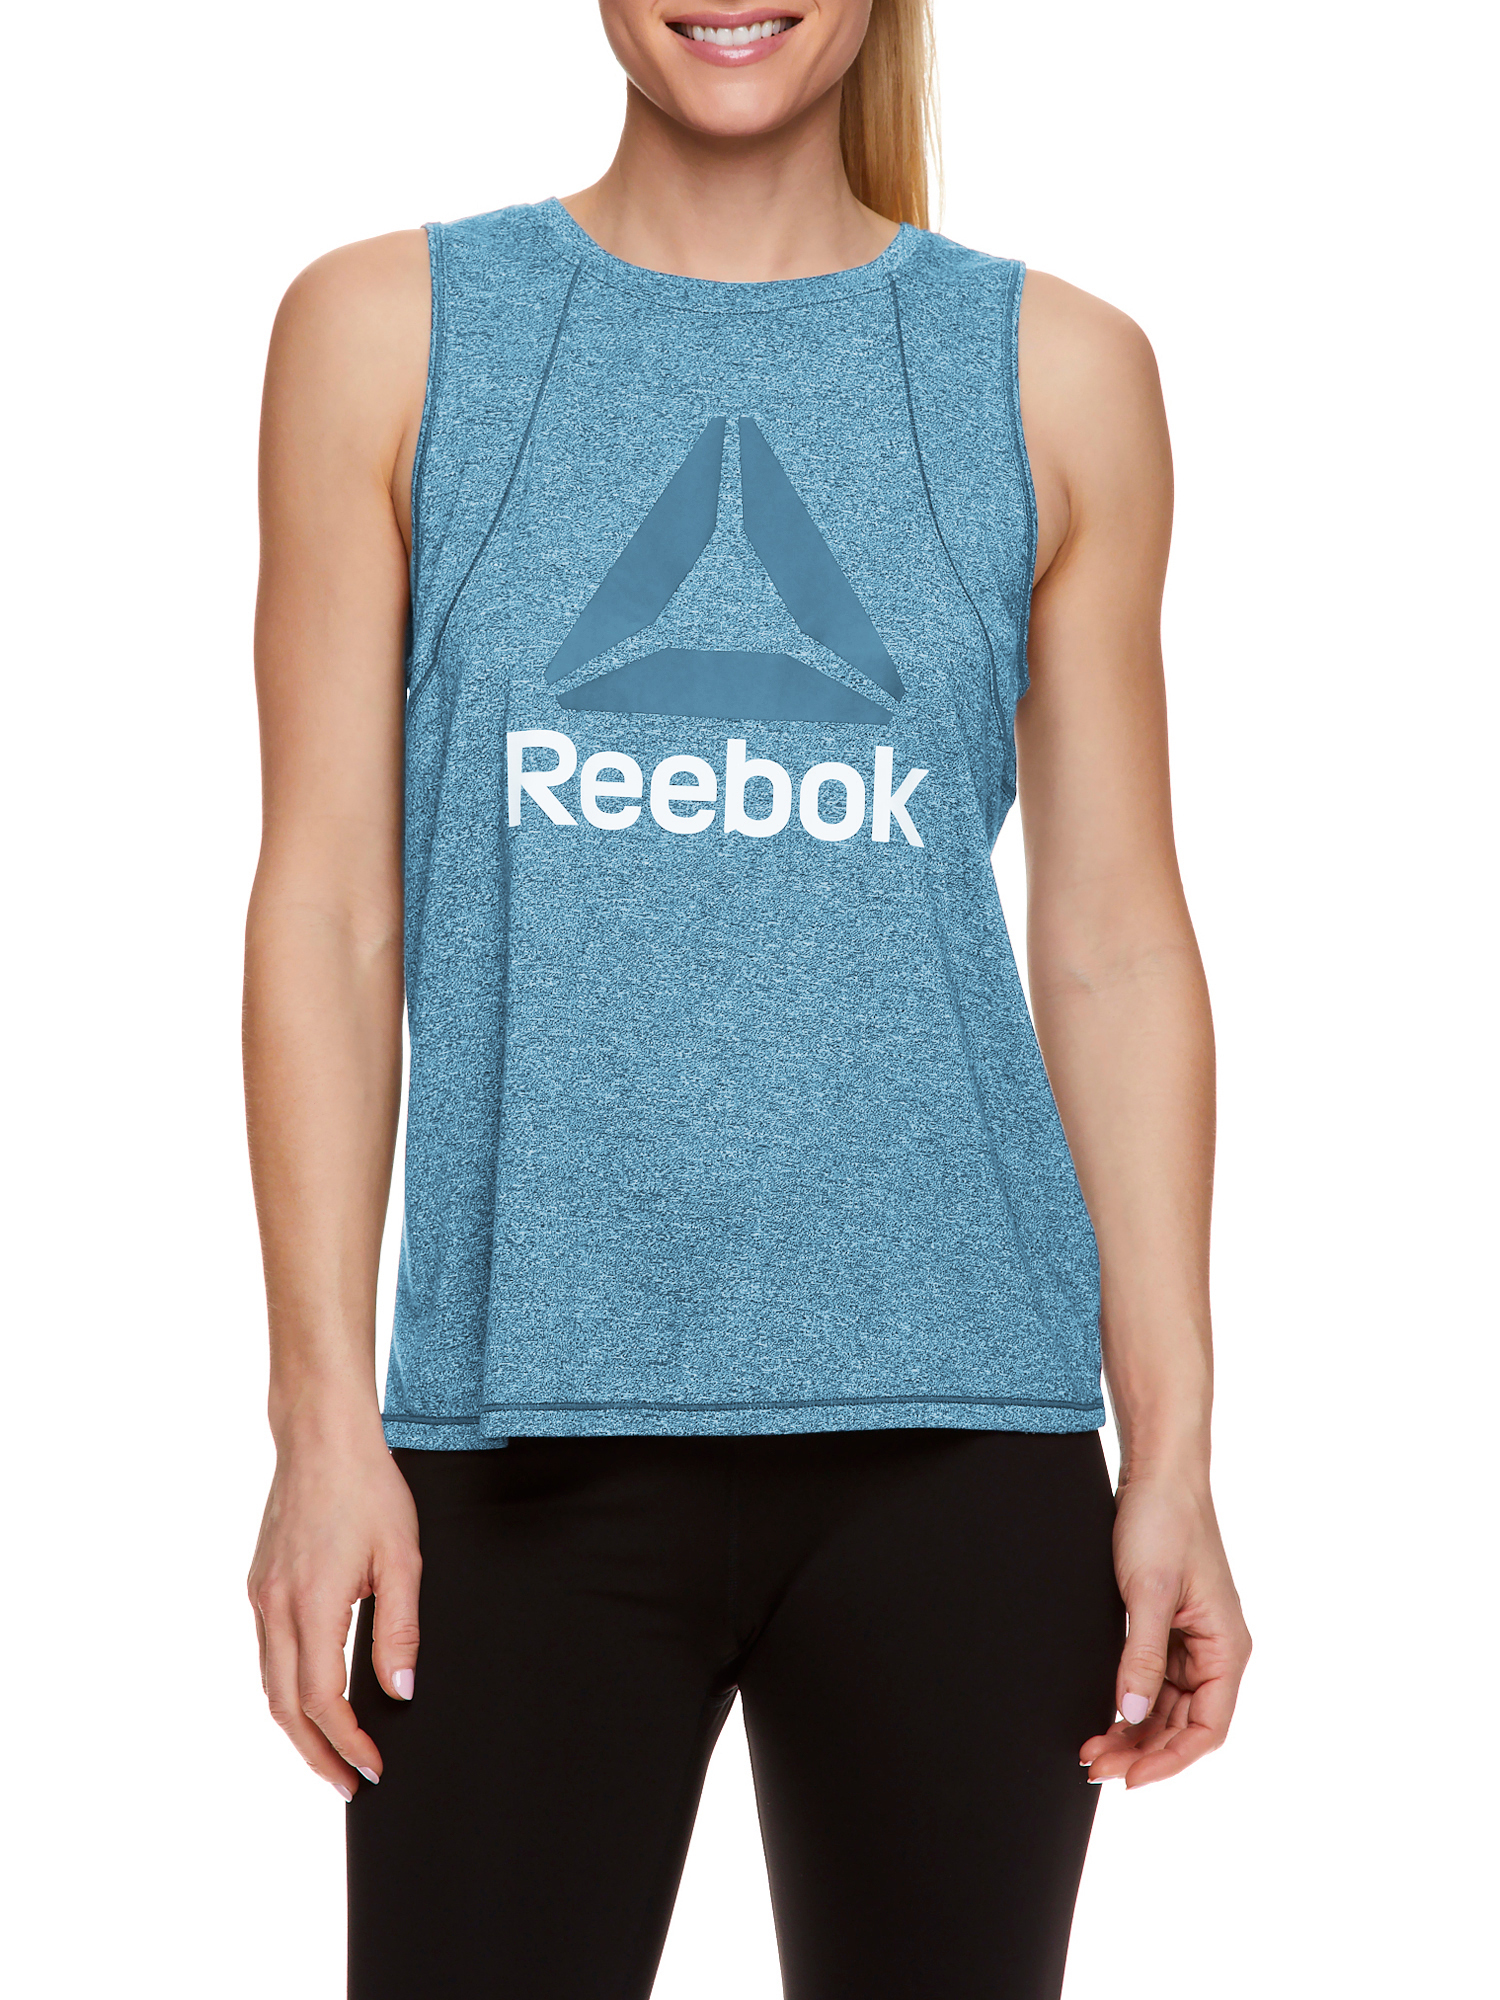 Reebok Womens Muscle Graphic Tank Top - image 1 of 4